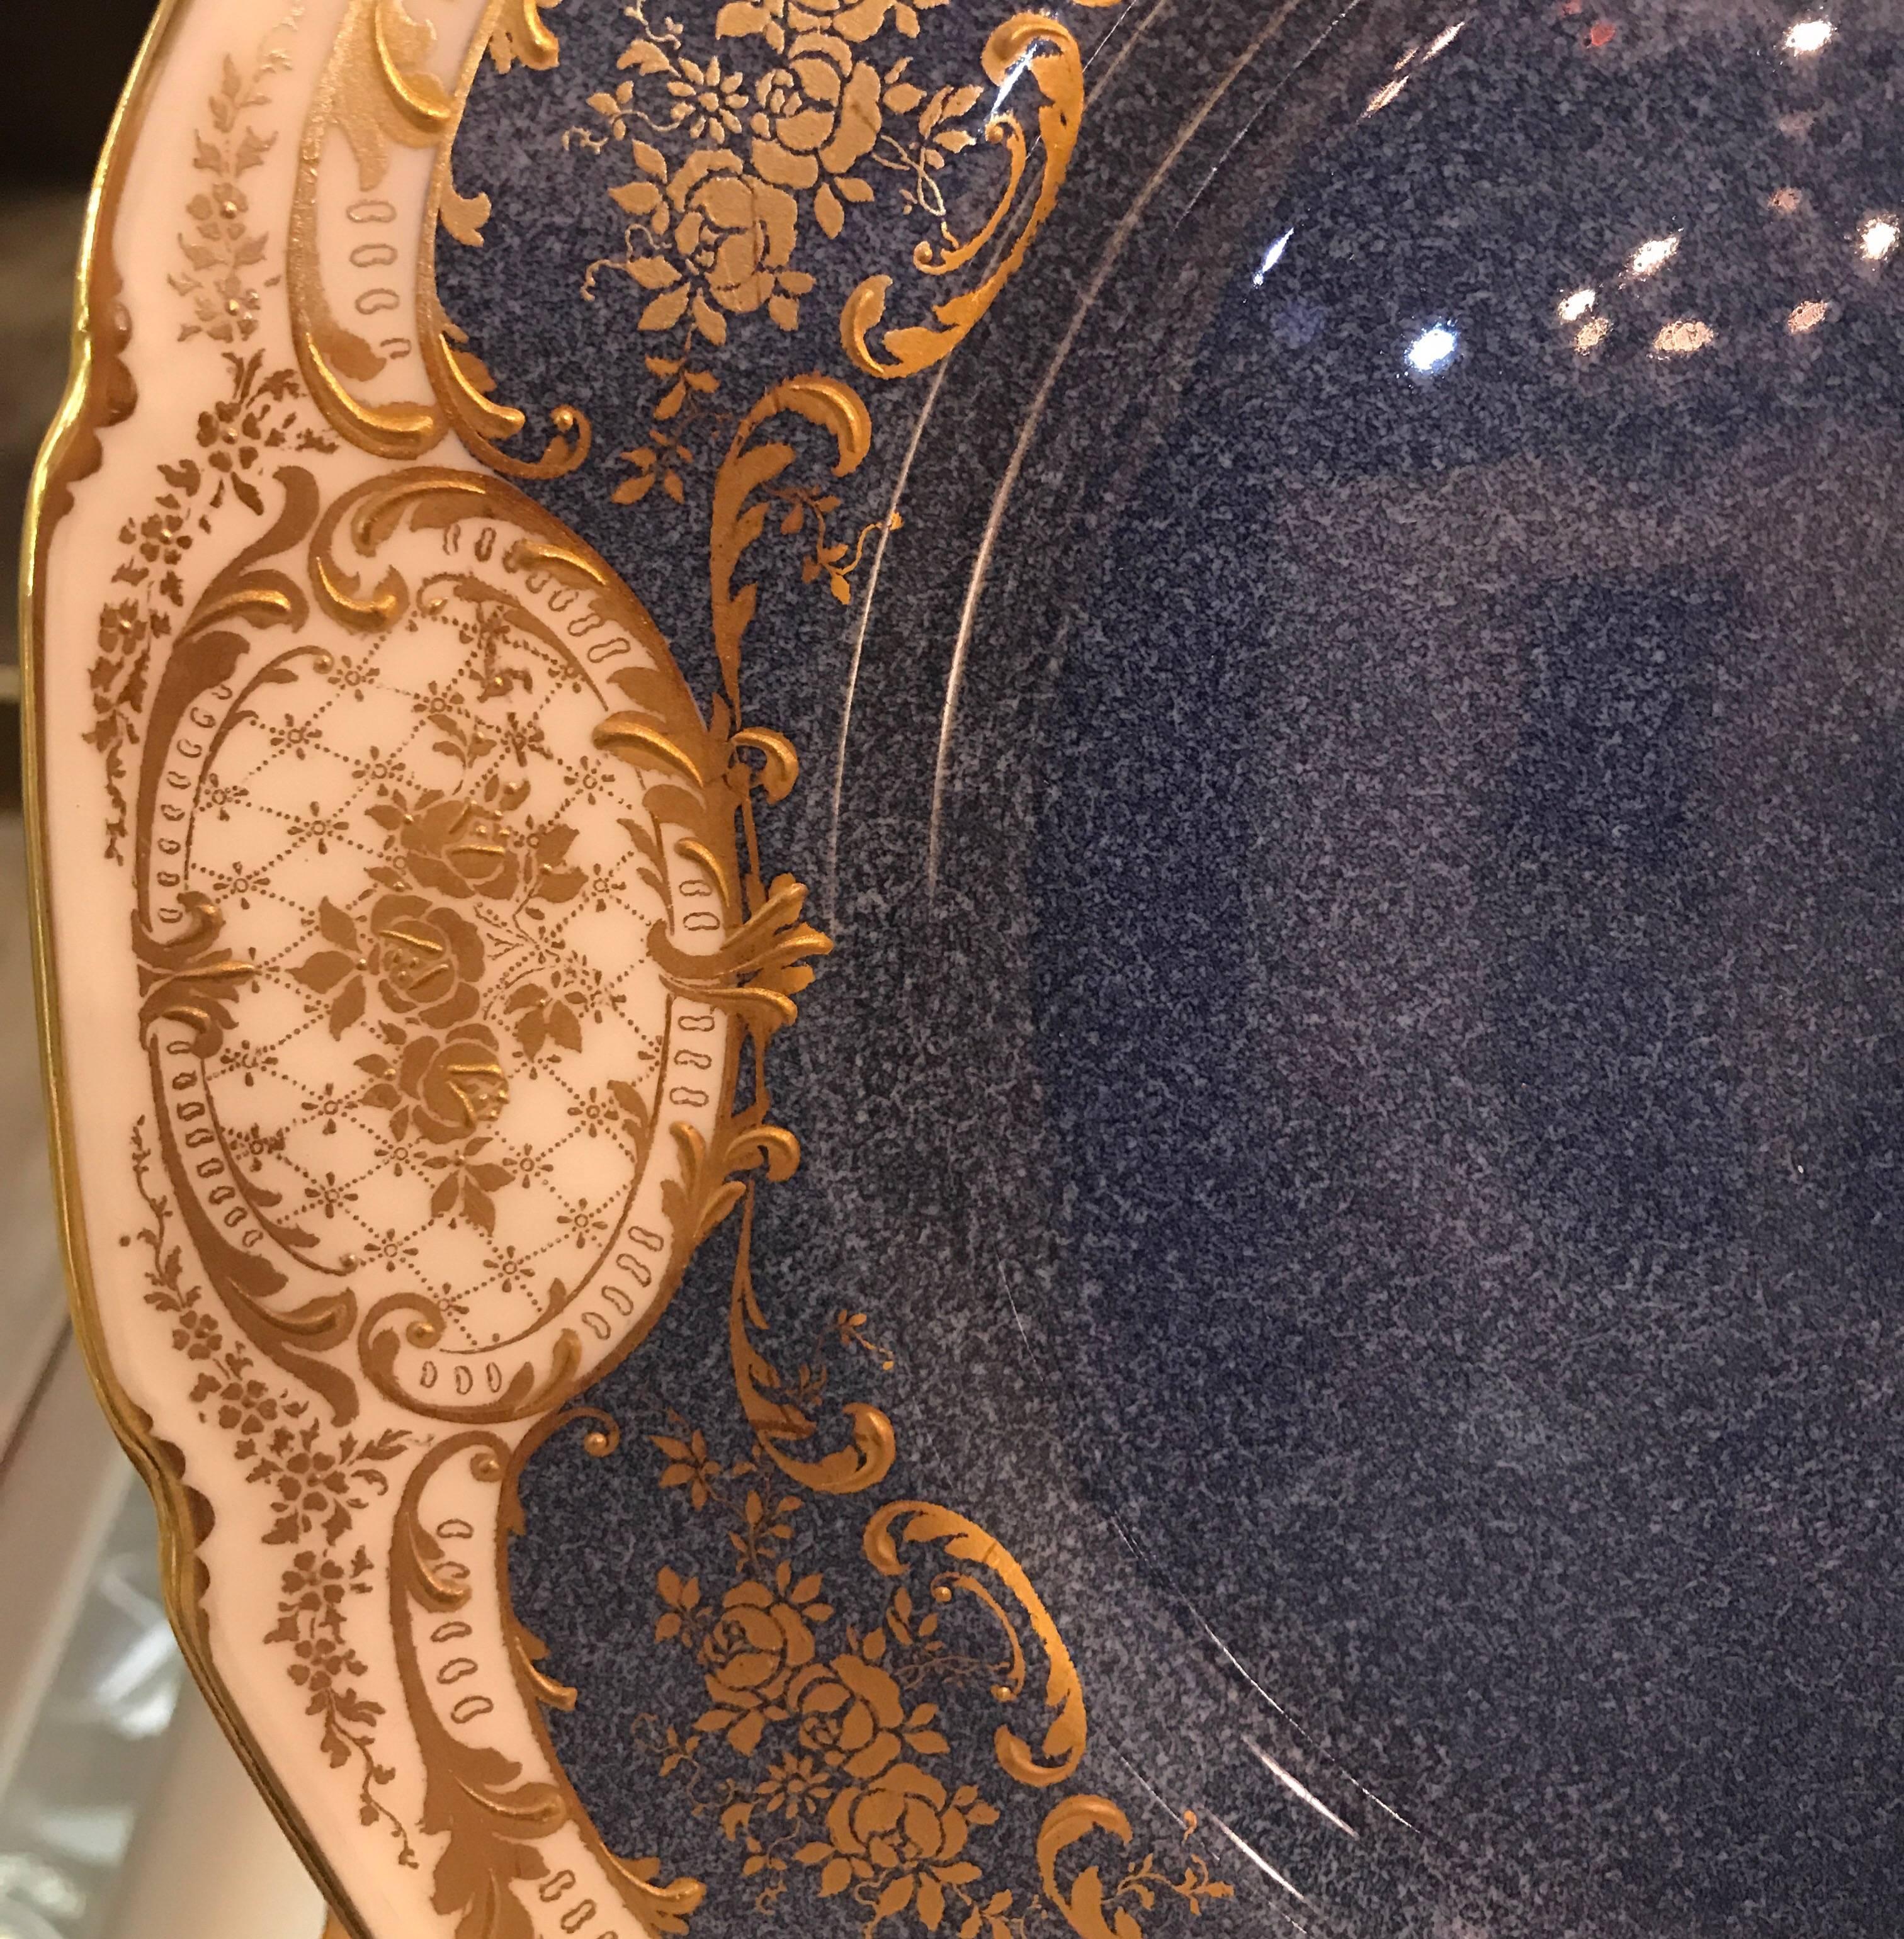 A set of 12 Edwardian raised gilt service plates made by Royal Doulton. The hand stippled cornflower blue centres surrounded by delicate lacy raised gilt borders. The plates are signed with the artist code for Herbert Benneley and the year mark of